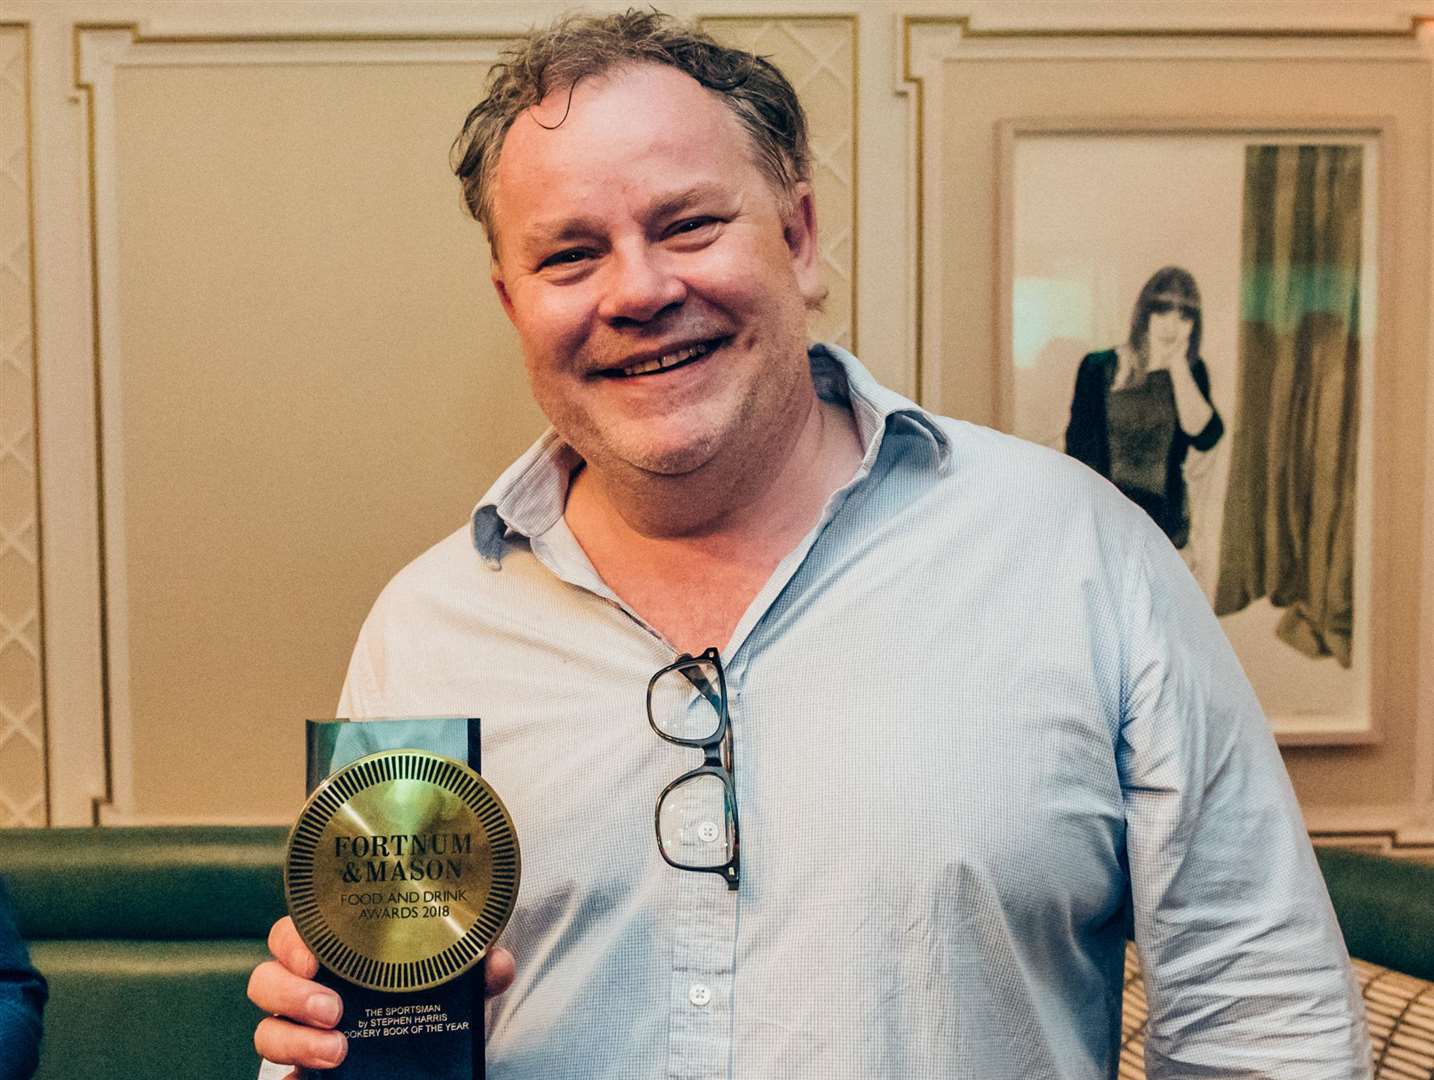 Stephen Harris with his newest award